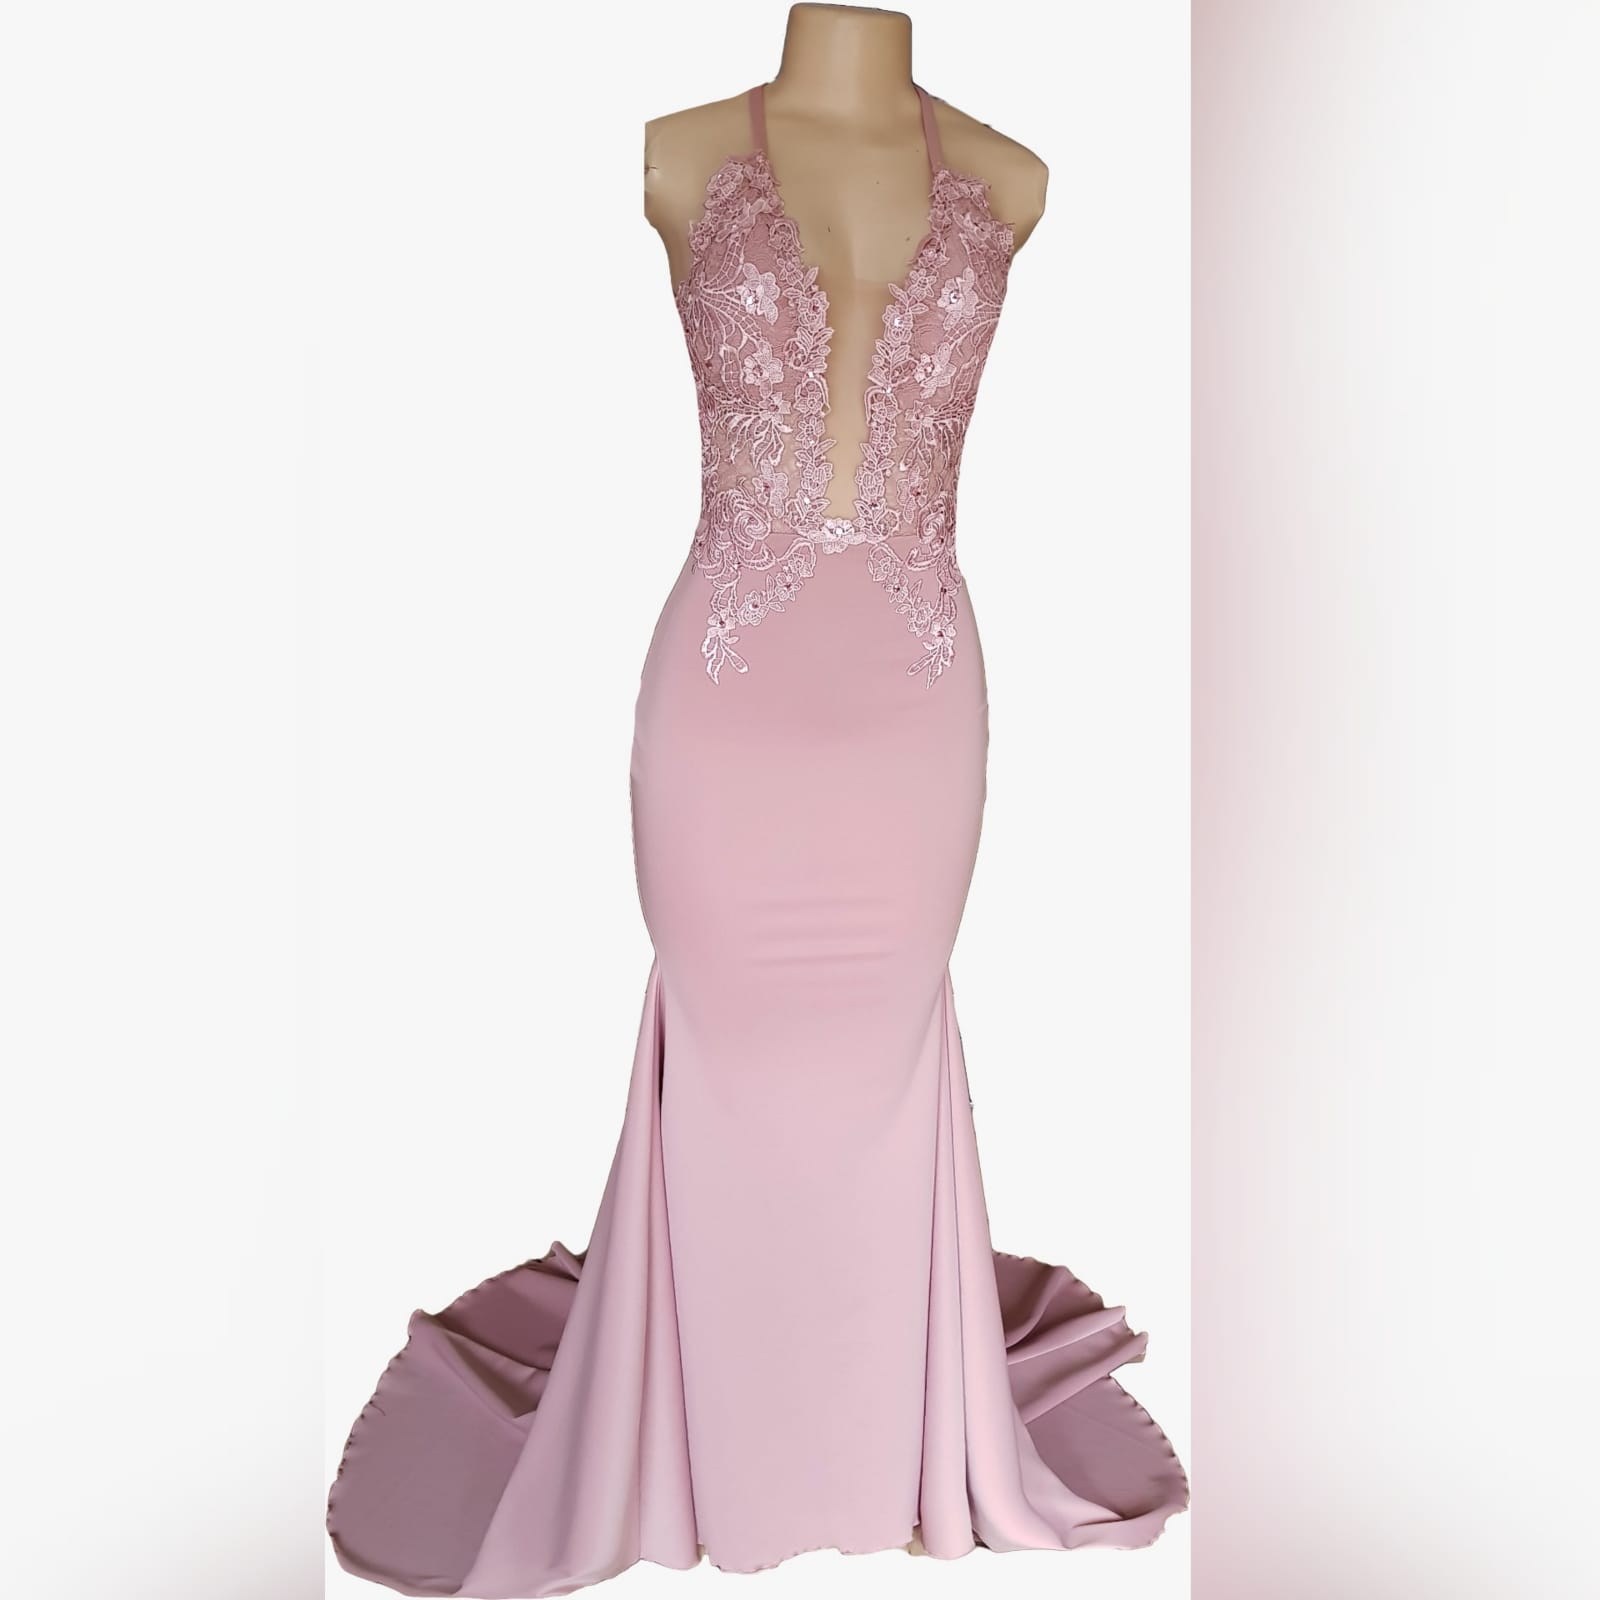 Pink sexy soft mermaid prom dress 6 look ravishing on your prom night with this pink sexy soft mermaid prom dress. A fitted lace bodice with a plunging neckline, low back and a train to add some glamour to your important event.